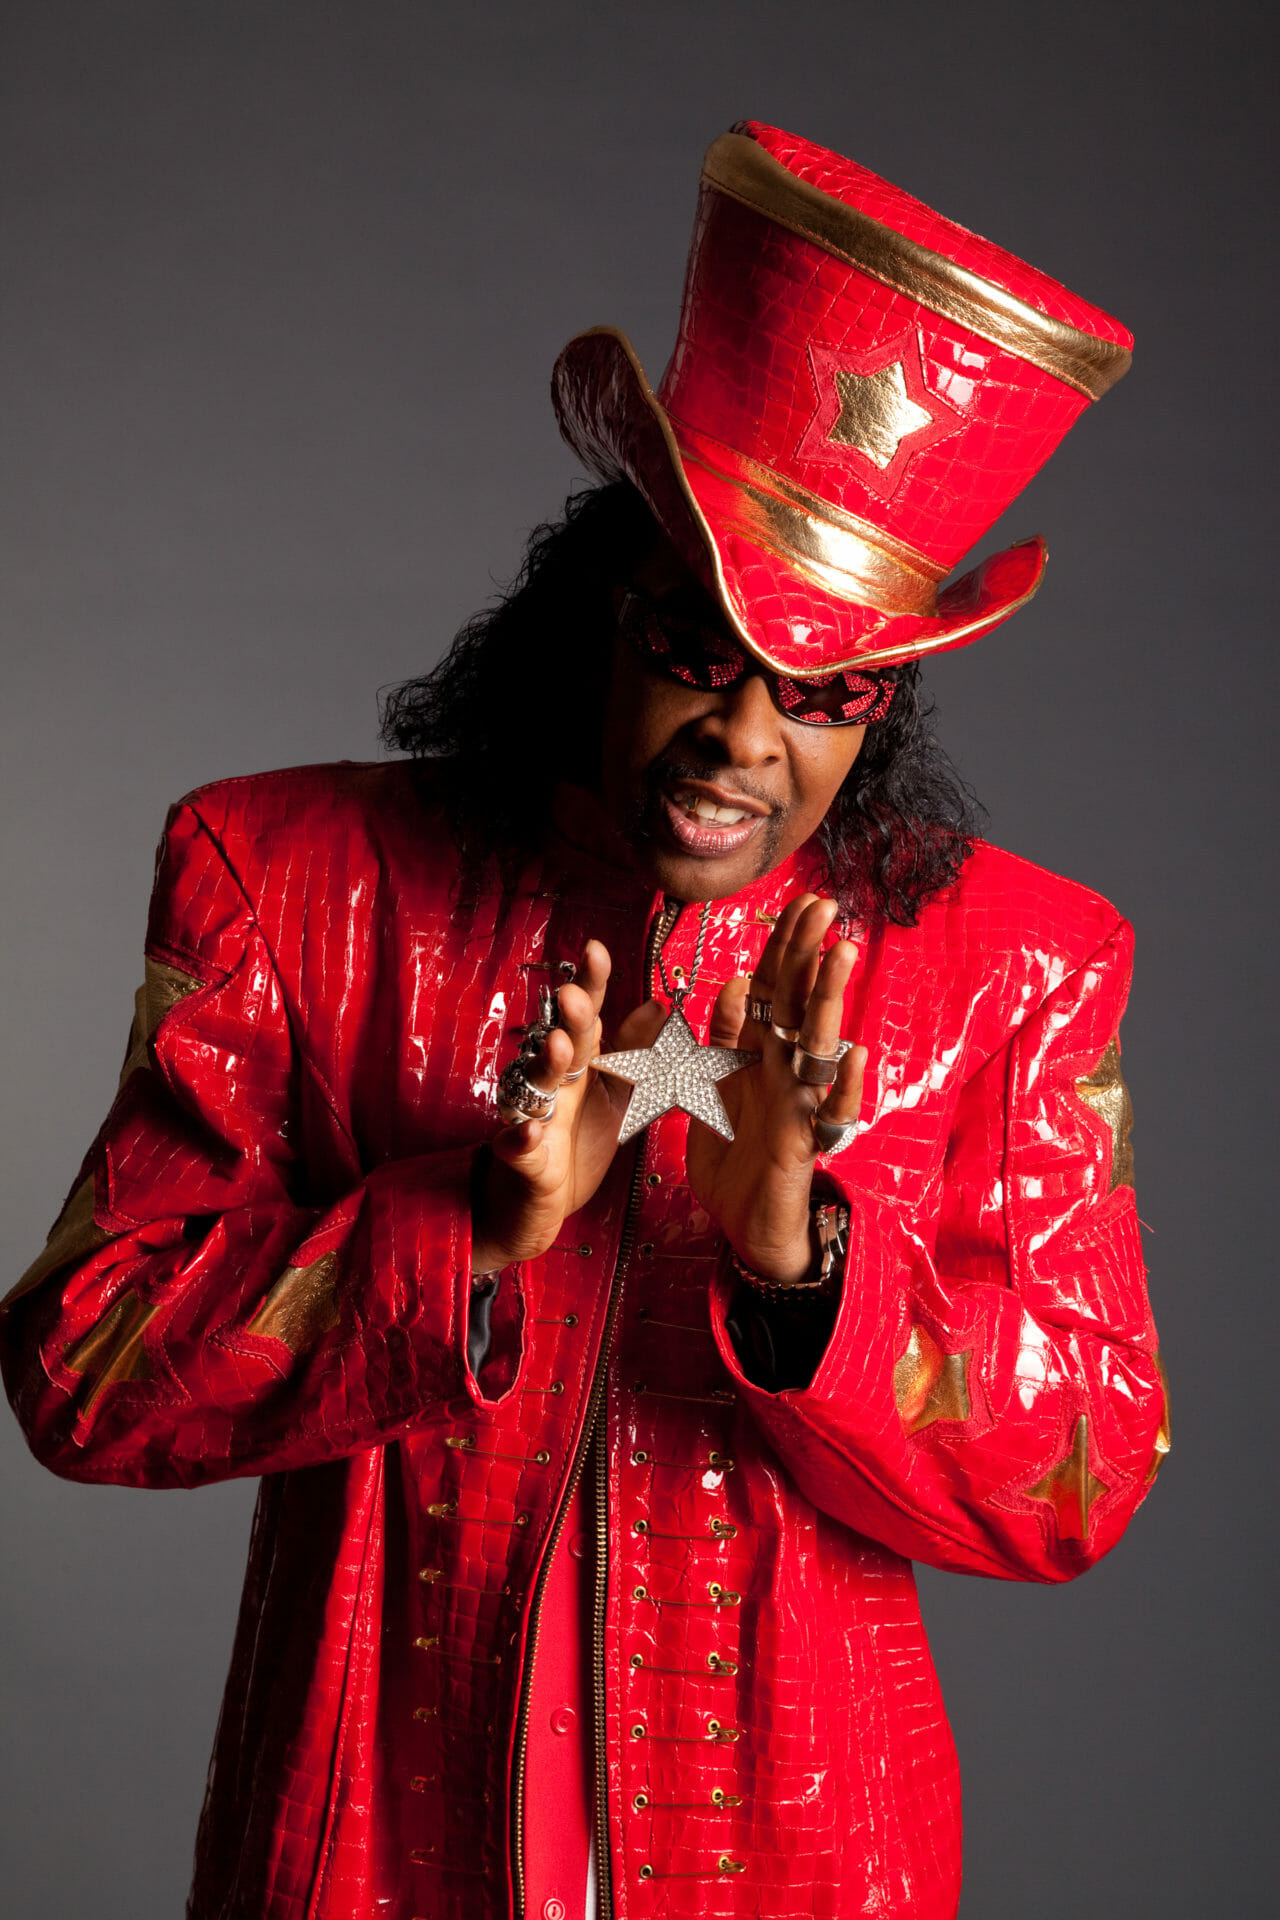 Bootsy Collins and Buckethead Share Two Songs to Benefit the People of Ukraine